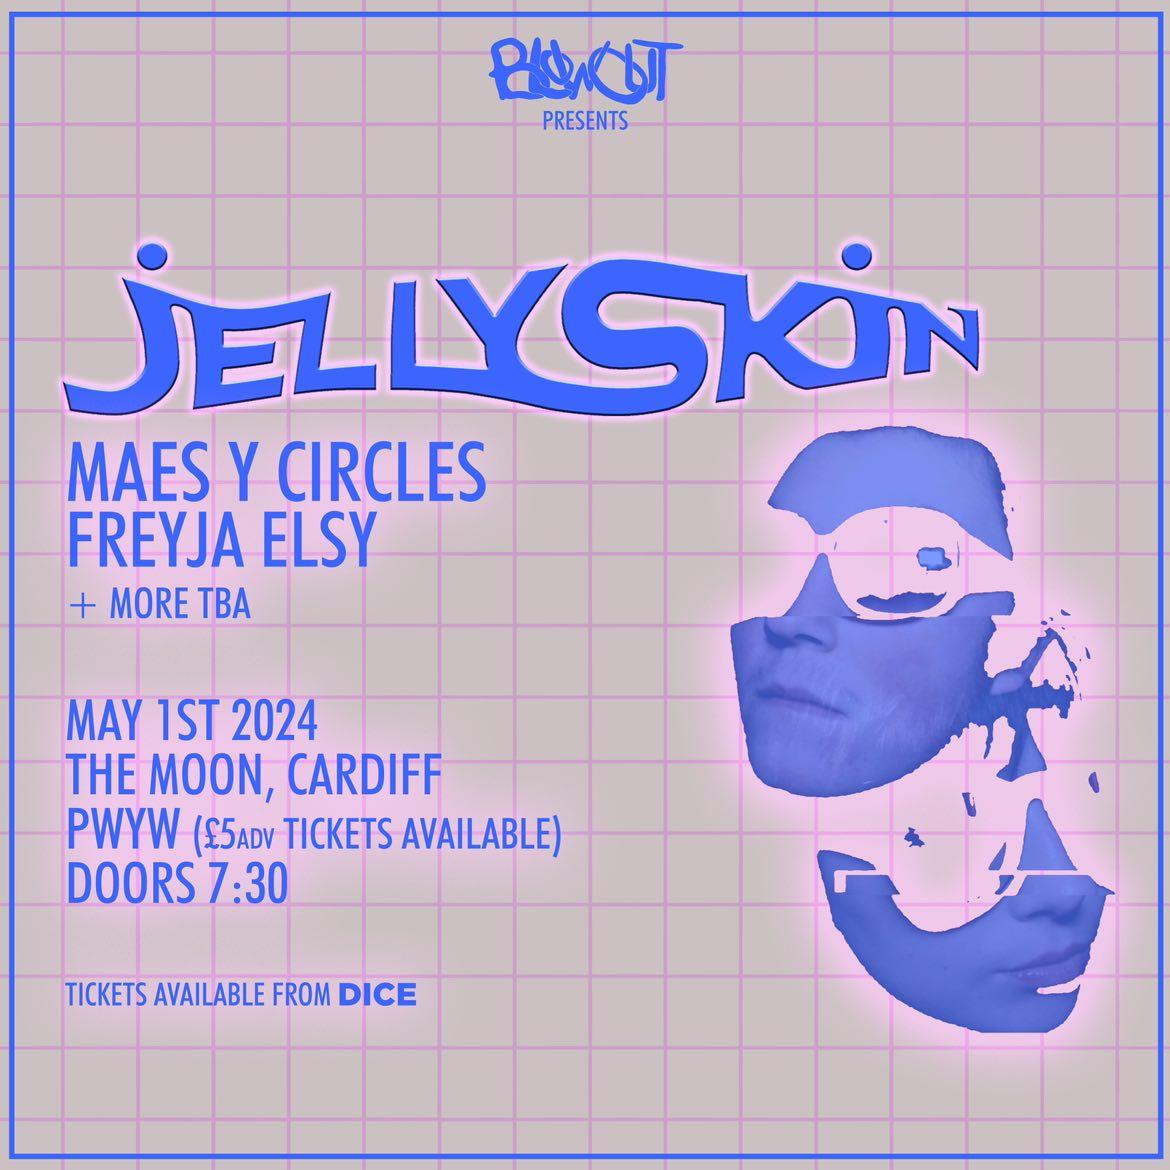 ☂️🔮☪️ GIG ALERT 😈🎵👾 Experimental electronica & synth-y goodness supporting the awesome @jellyskinband with @maesycircles (+ more...) 📌 @TheMoonCardiff 📆 1st May 2024 🕰 7:30pm Super psyched, get it in ur diaries, get ur tickets now xo 🎟🔗 link.dice.fm/h4ce9a82e6f6